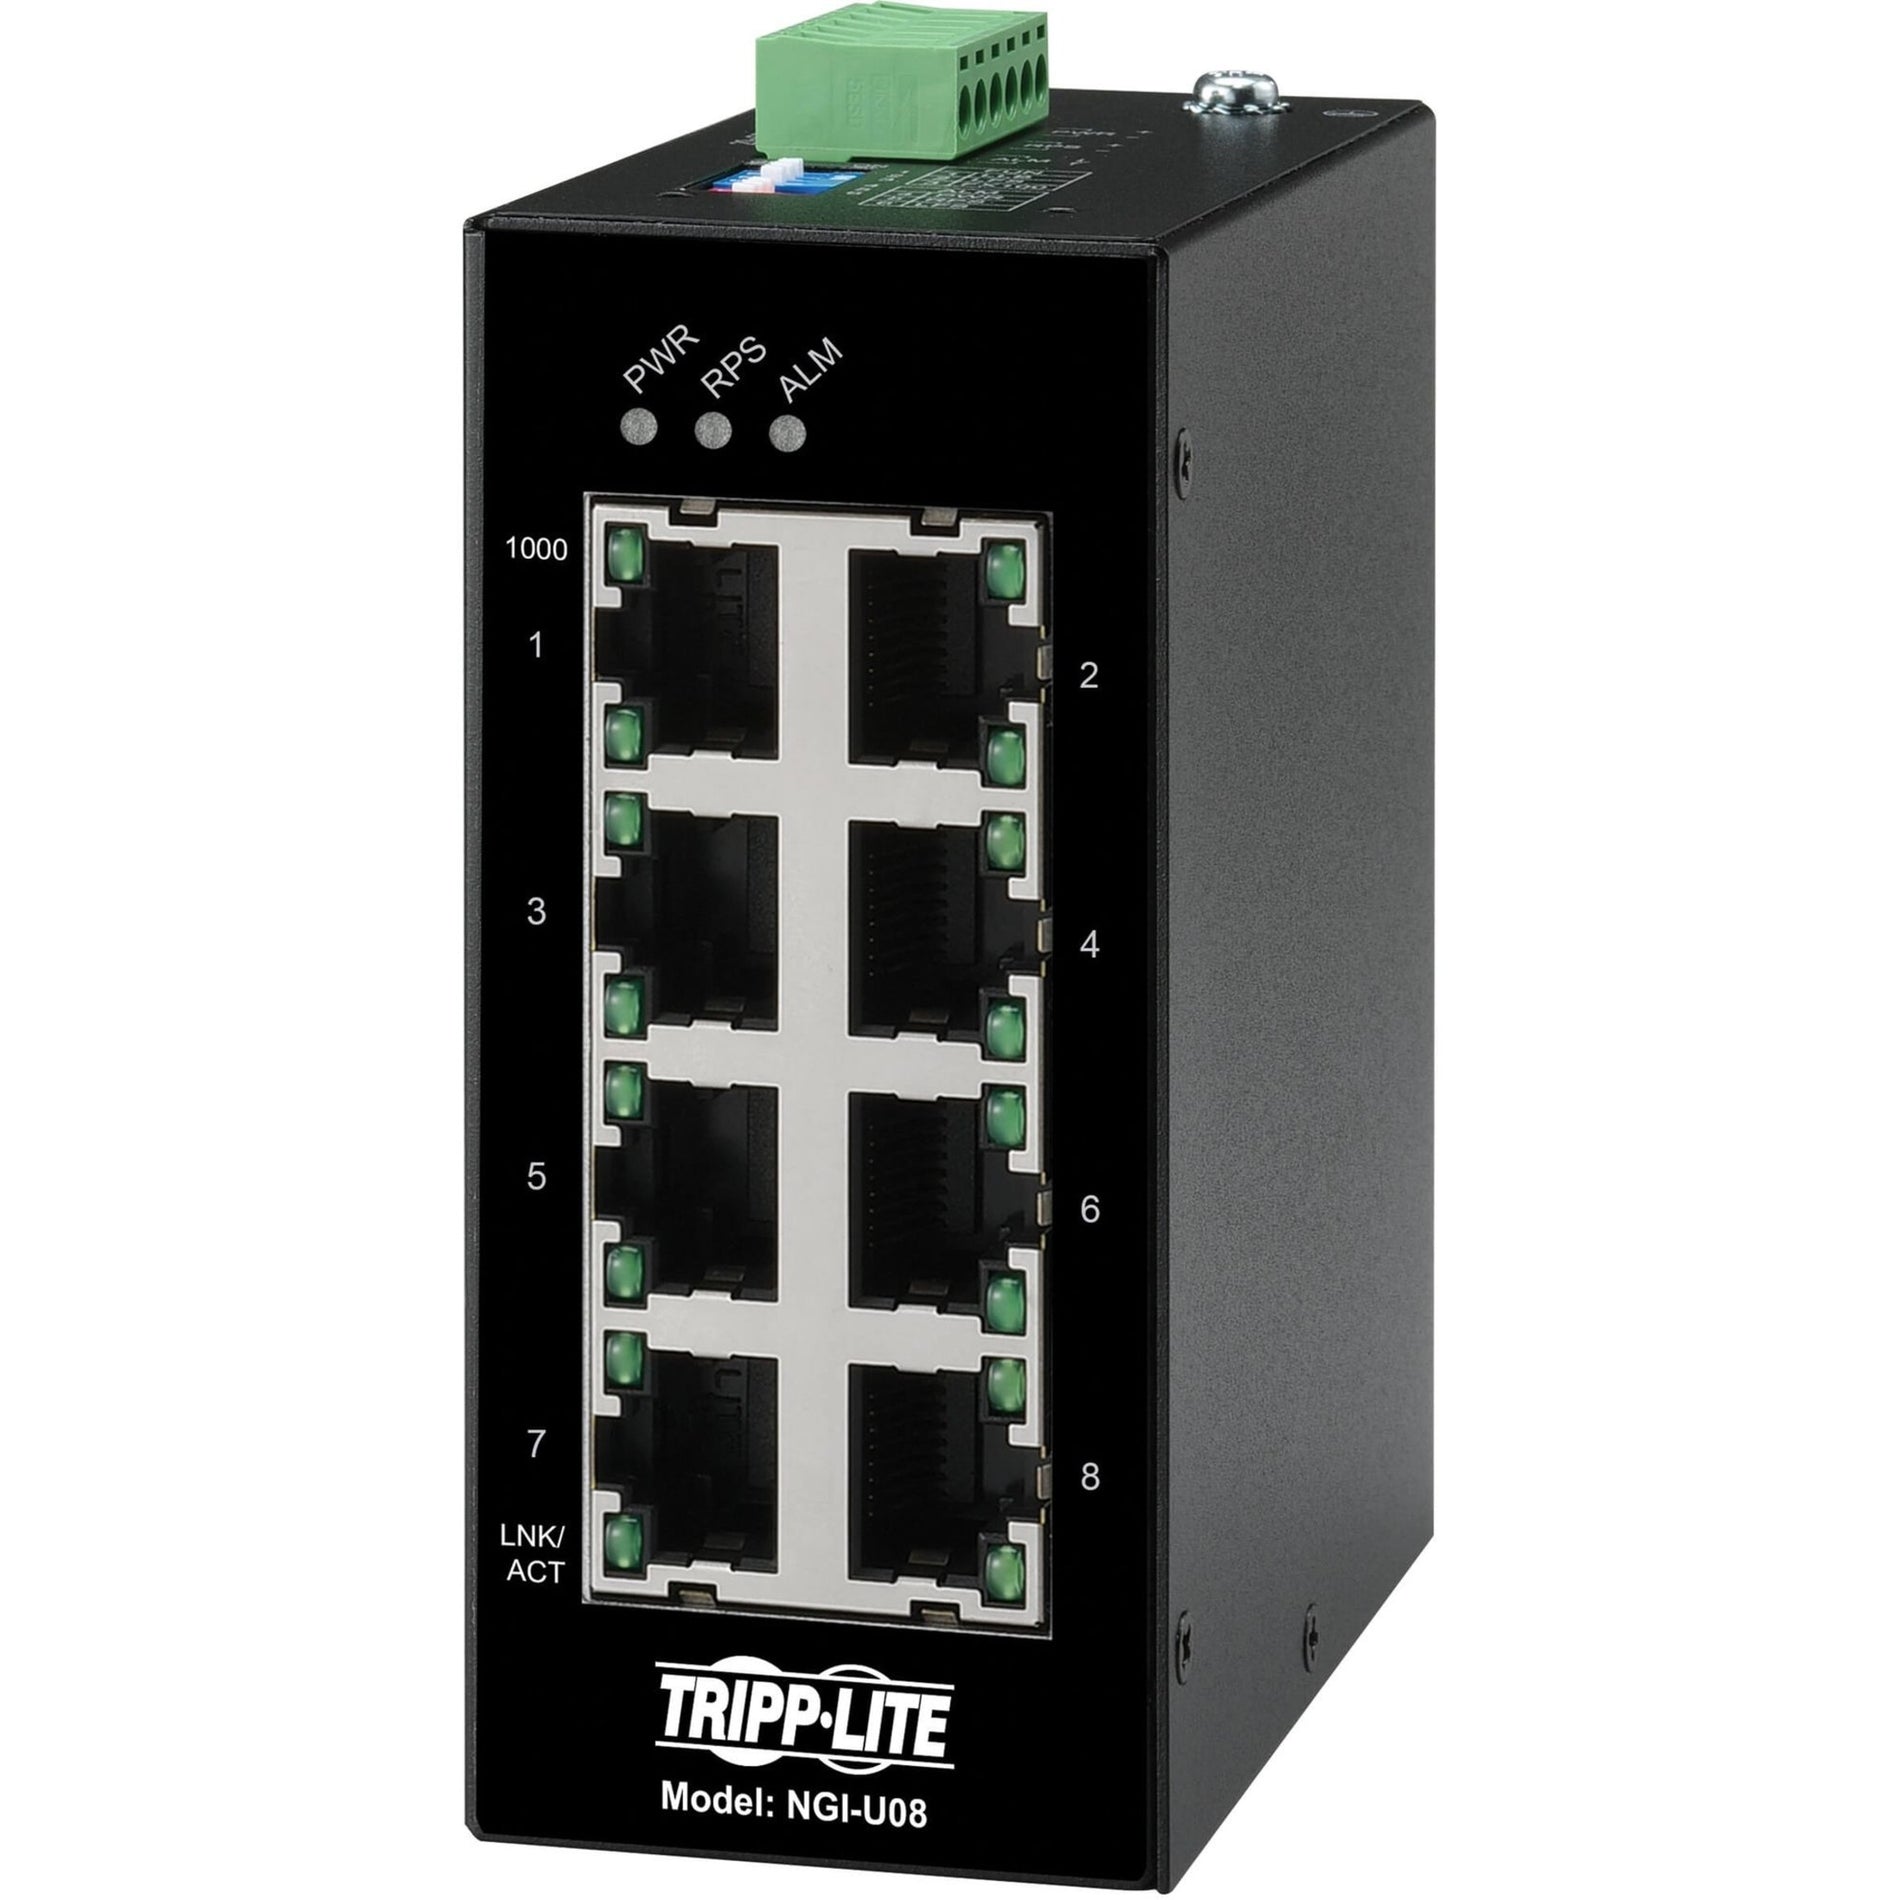 Tripp Lite NGI-U08 Ethernet Switch, Unmanaged 8-Port Industrial 10/100/1000 Mbps DIN, TAA Compliant